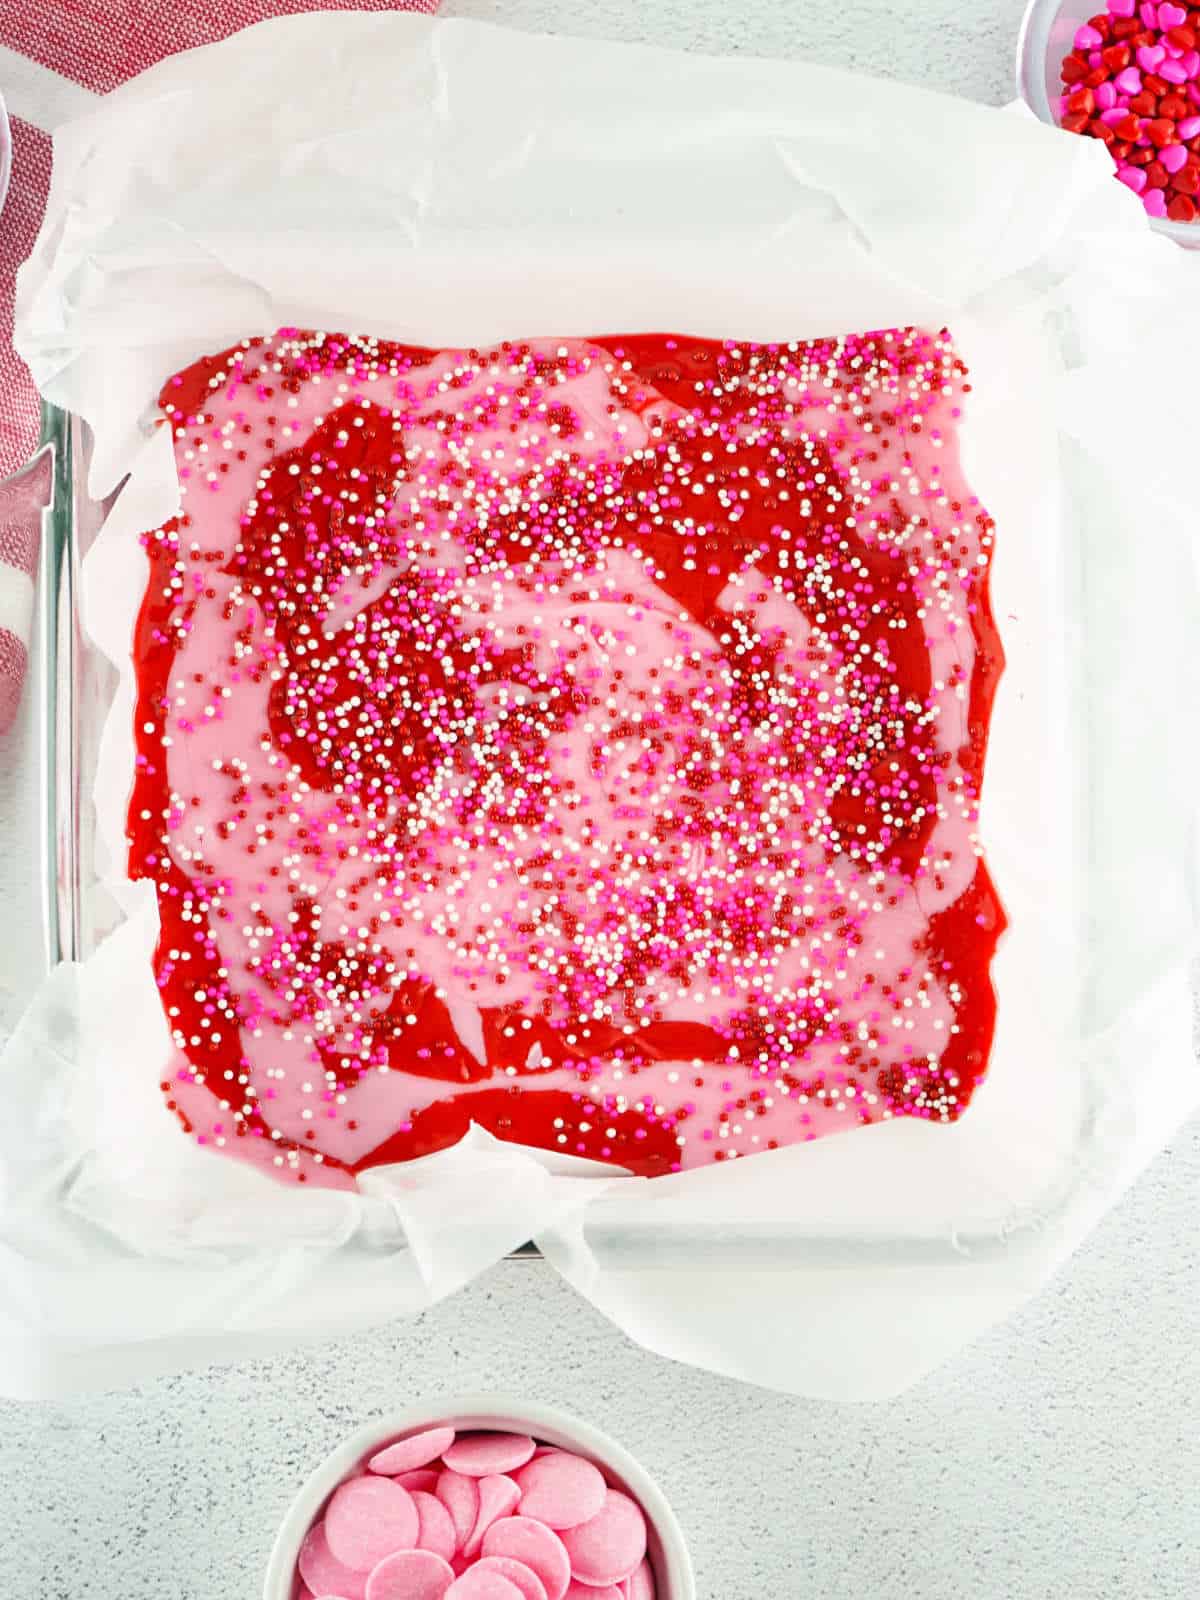 baking pan of strawberry fudge sprinkled with Valentines themed sprinkles.